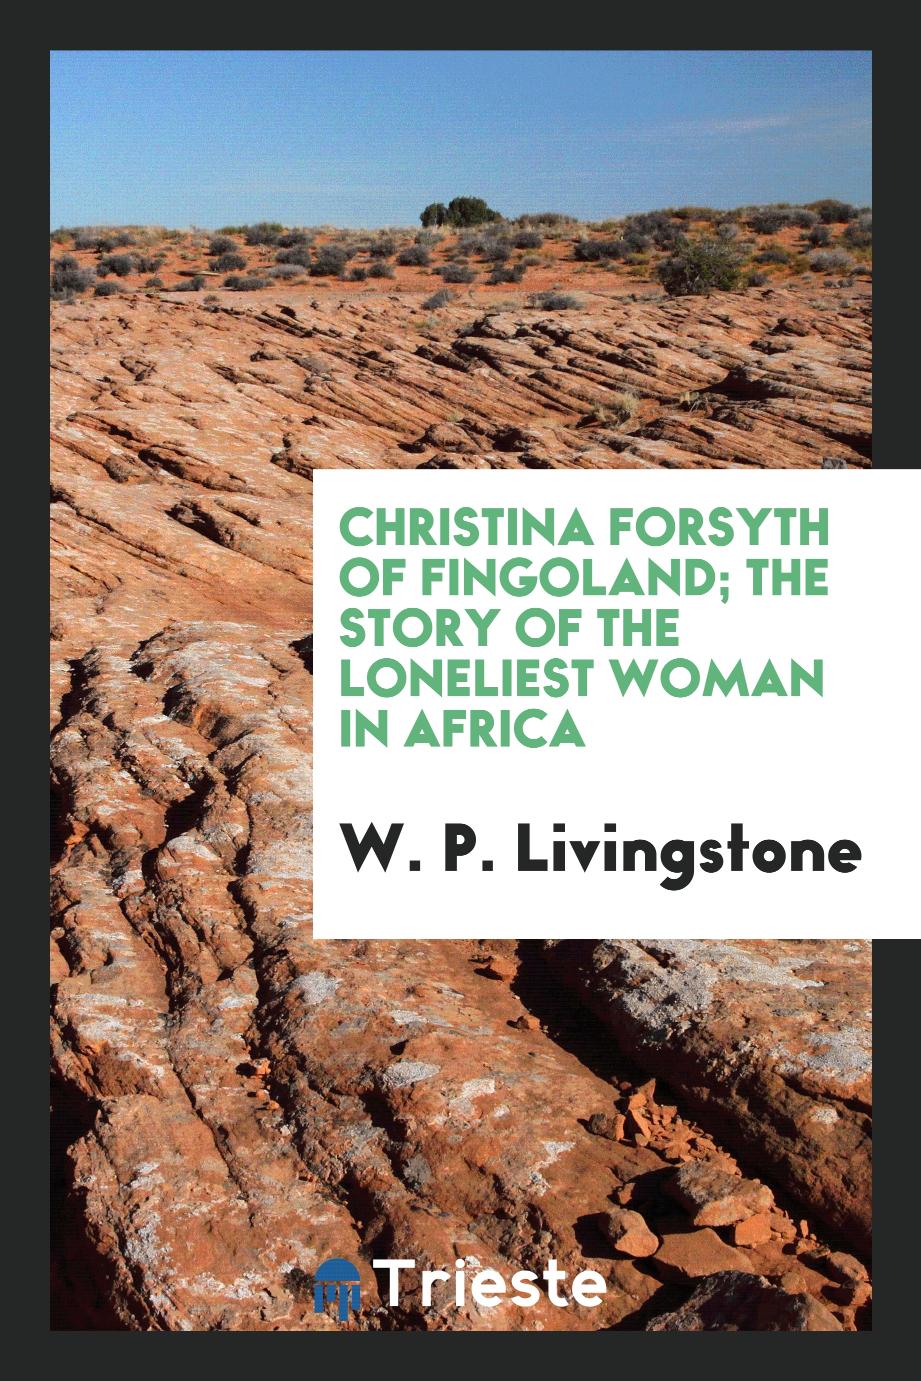 Christina Forsyth of Fingoland; the story of the loneliest woman in Africa